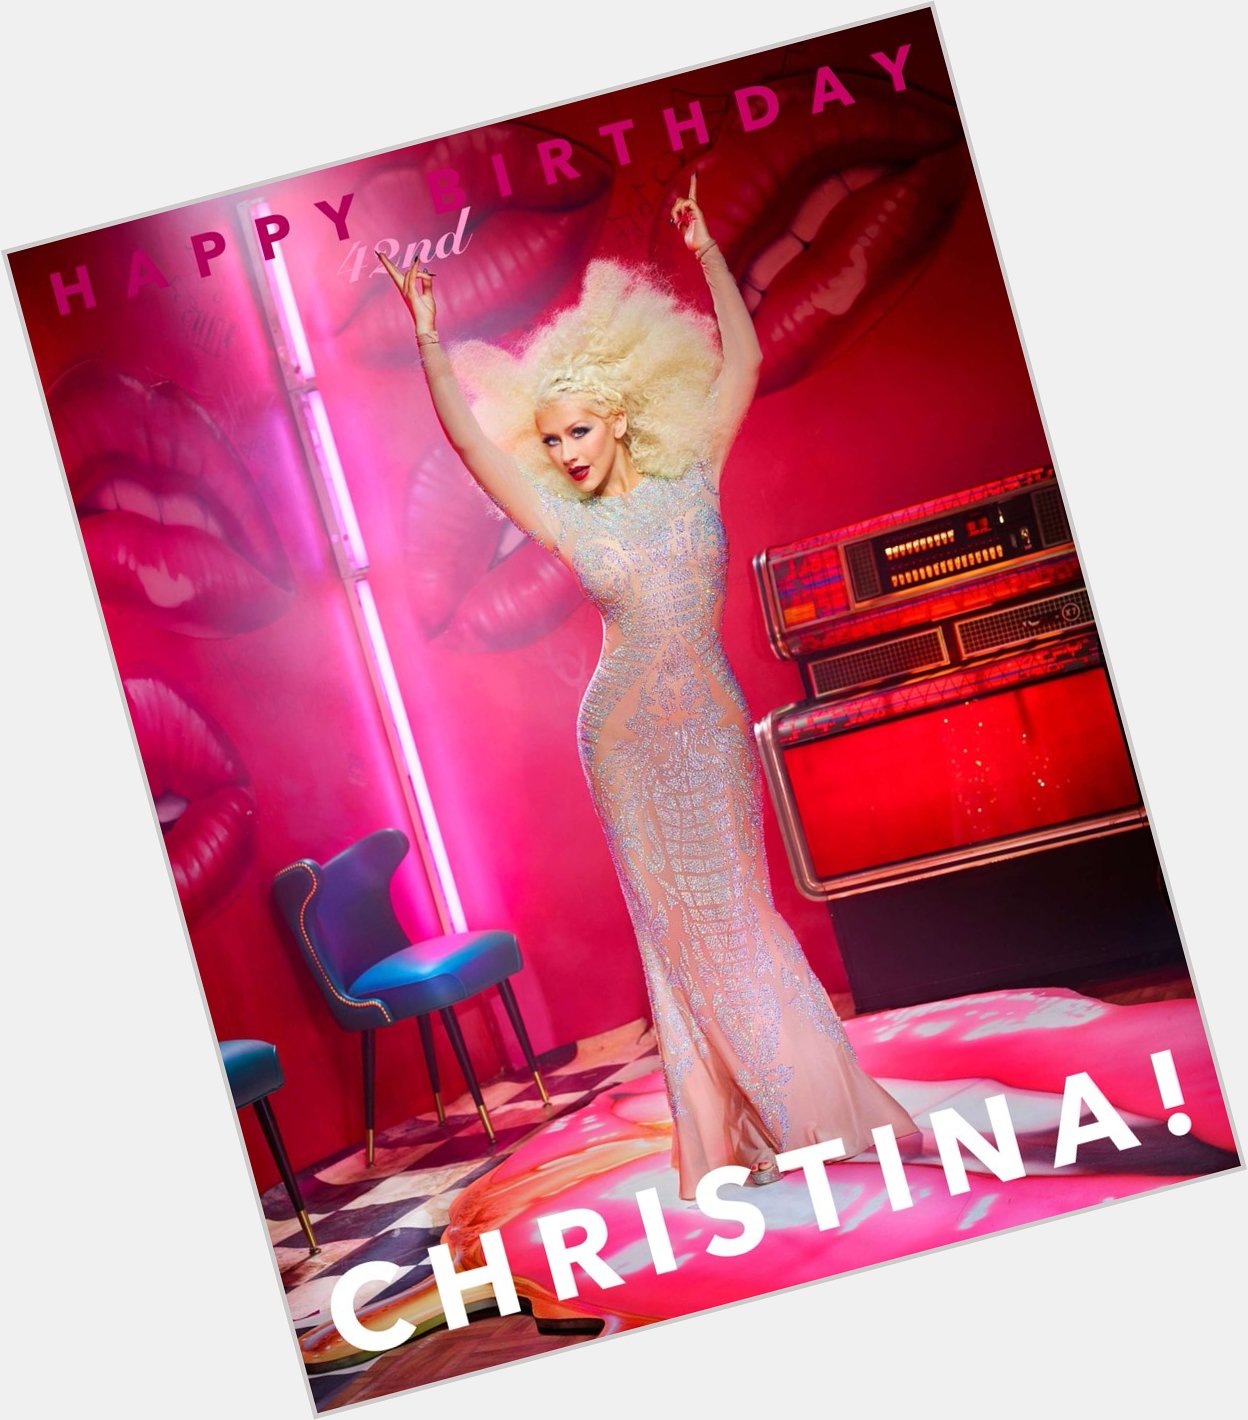 Happy birthday to the one, the only, Christina Aguilera!   